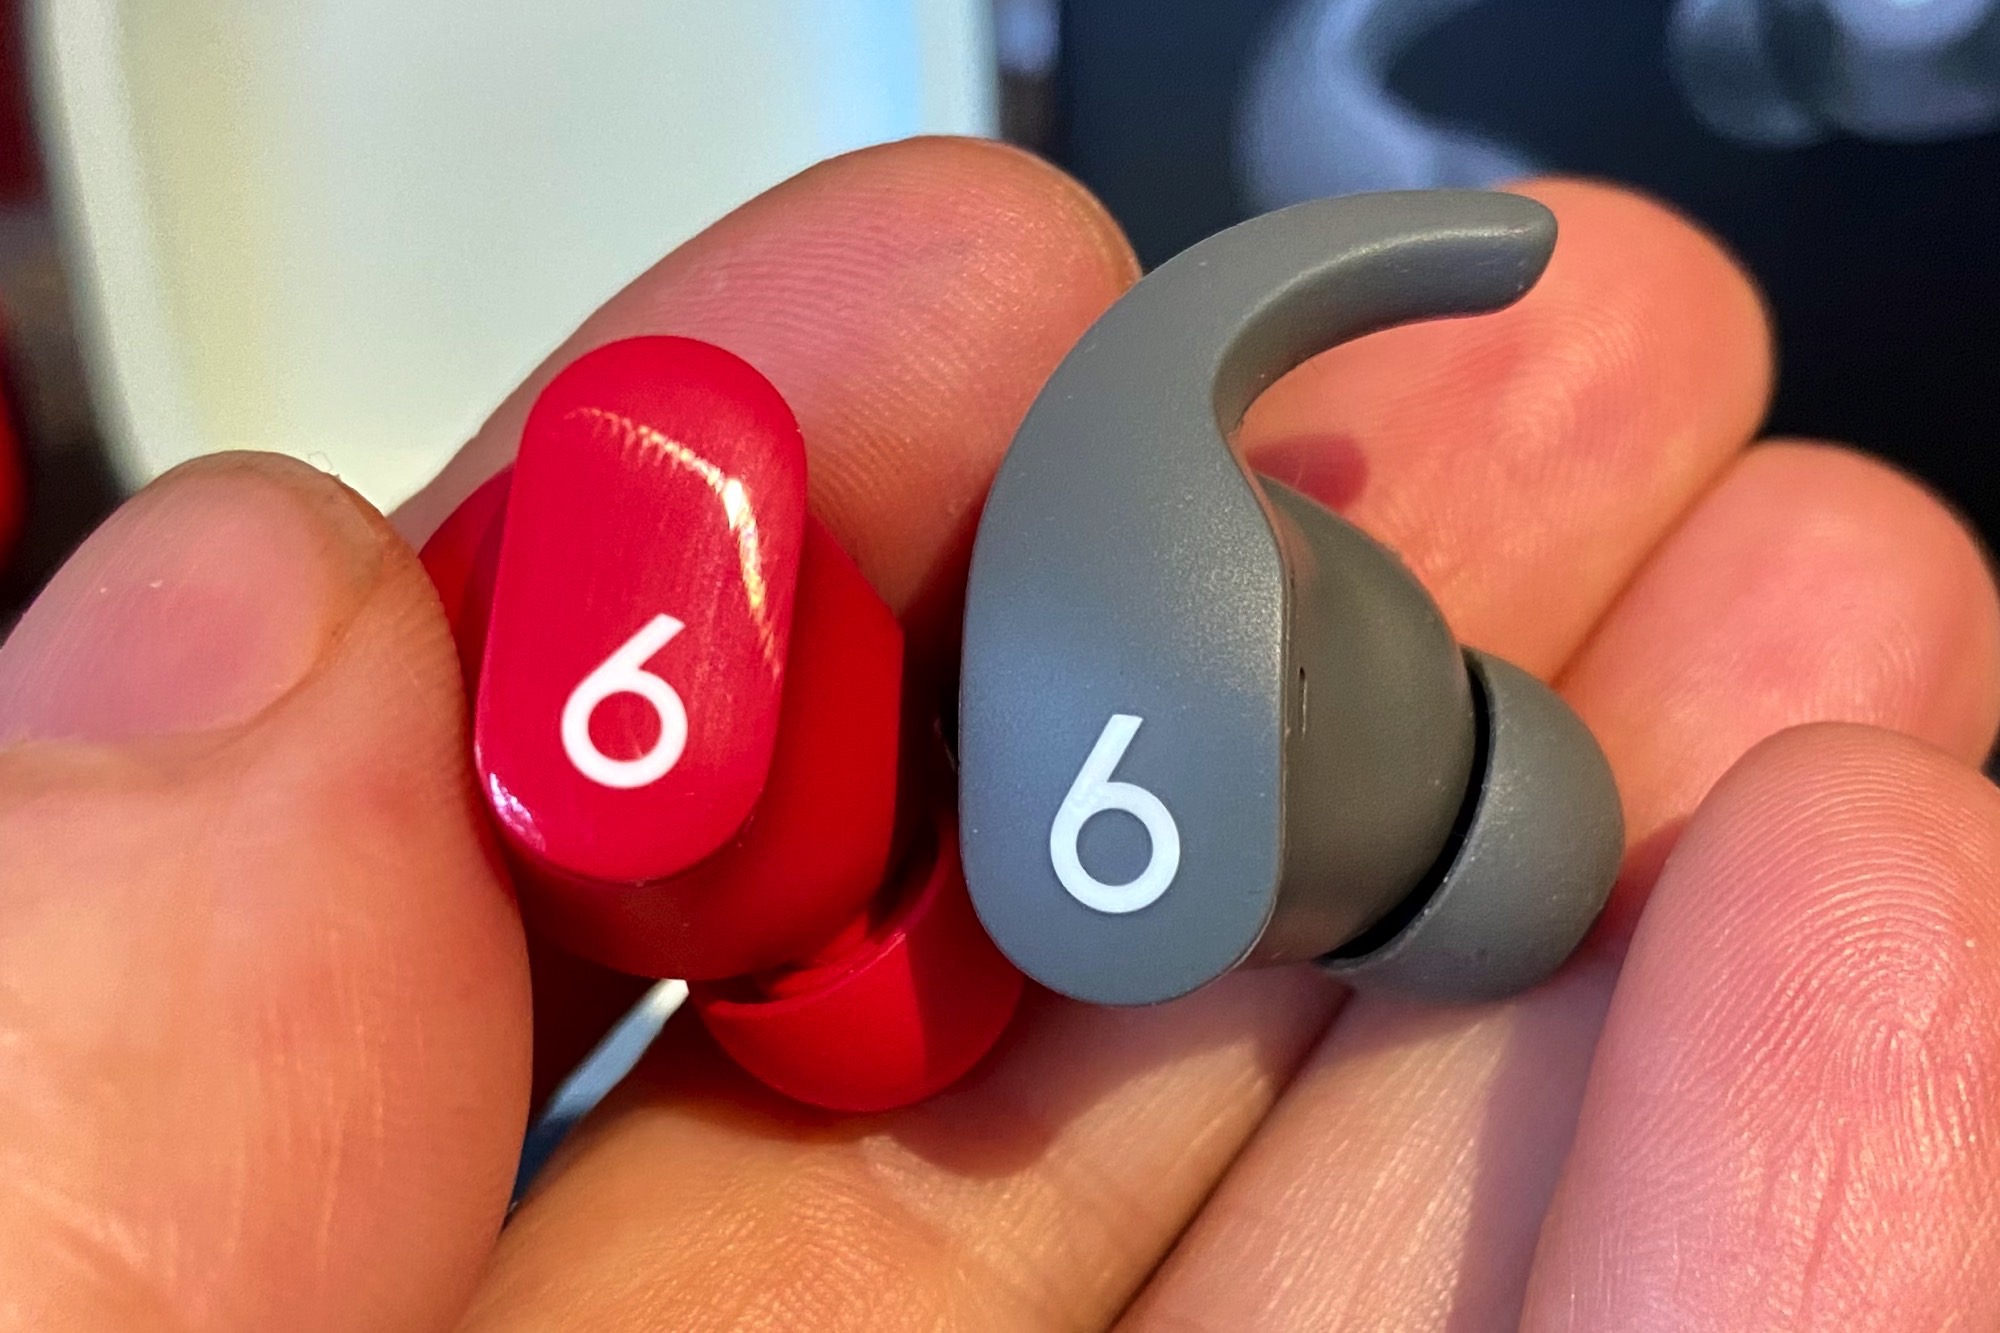 Beats Fit Pro review: Better than AirPods Pro